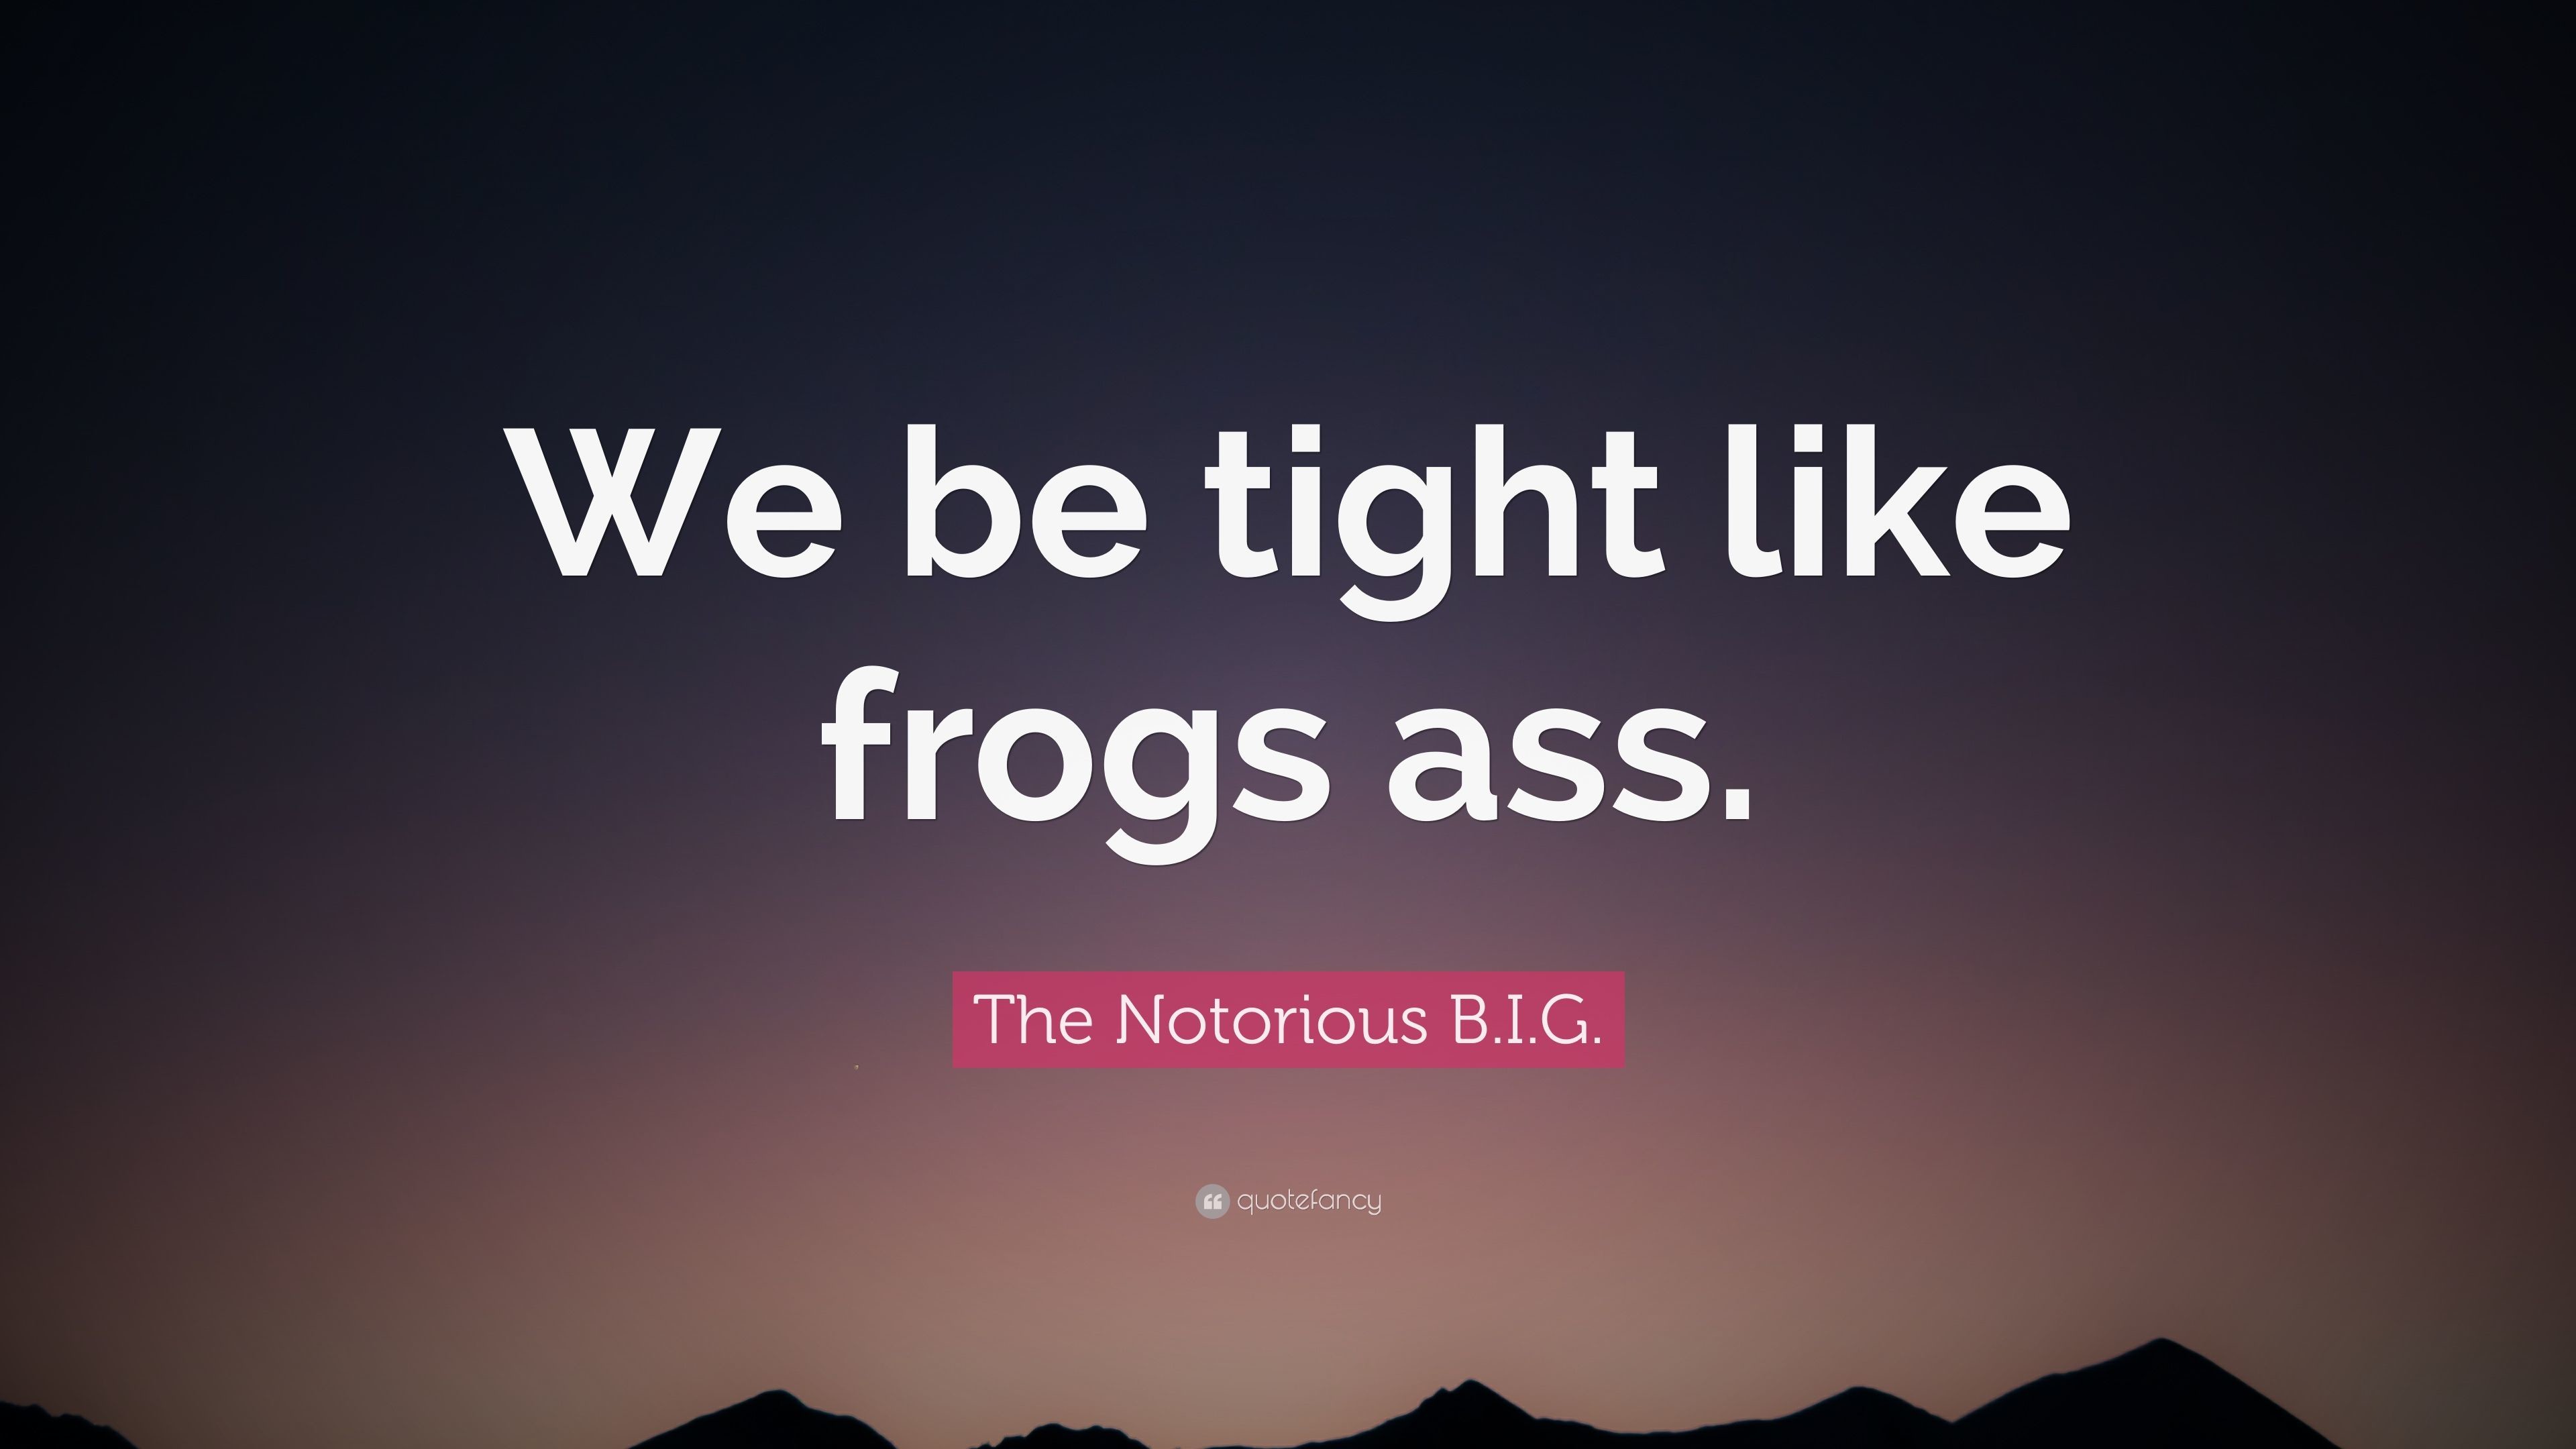 The Notorious B.I.G. Quote We be tight like frogs ass.